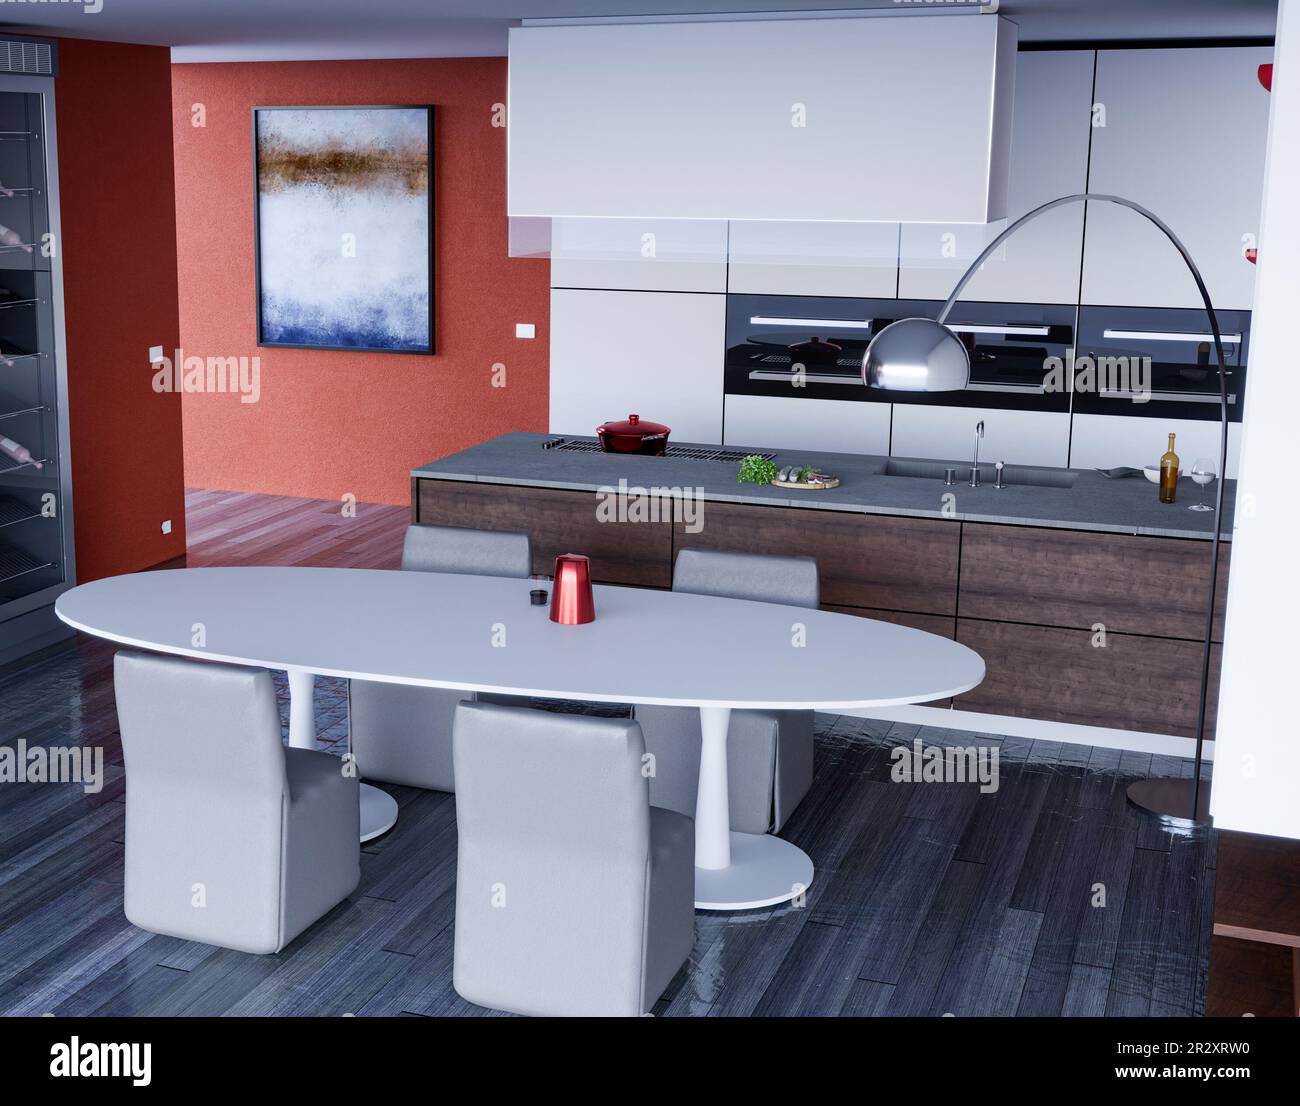 View of a modern kitchen interior furniture. Stove and furniture with table and chairs. Interior architecture, project for a modern kitchen Stock Photo